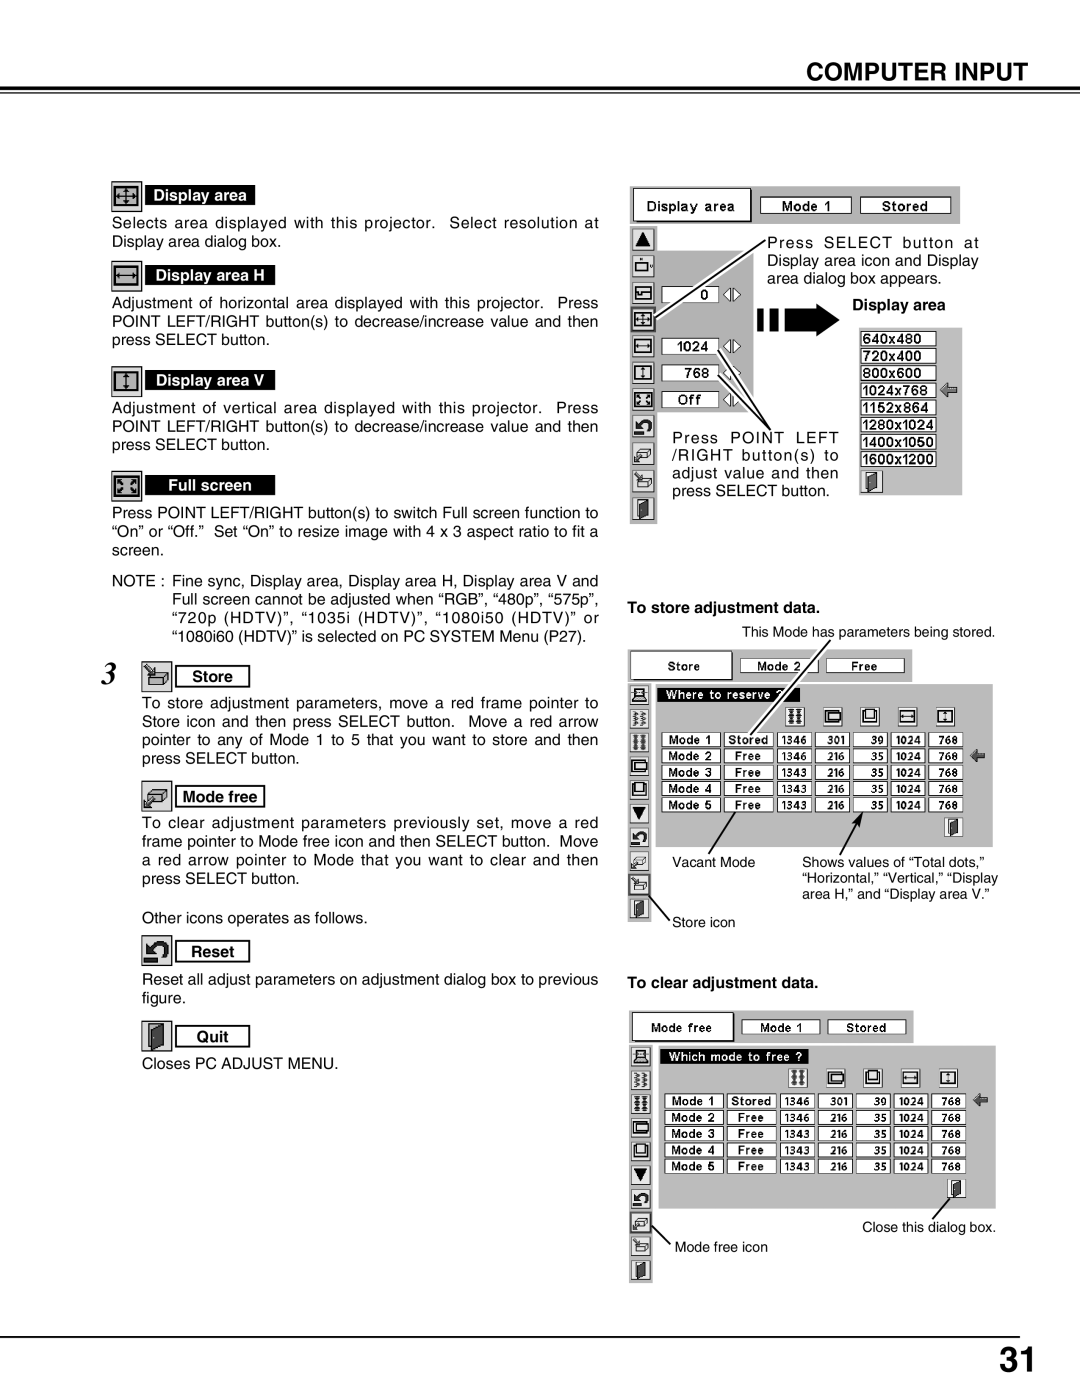 Eiki LC-UXT3 instruction manual Computer Input, Other icons operates as follows 